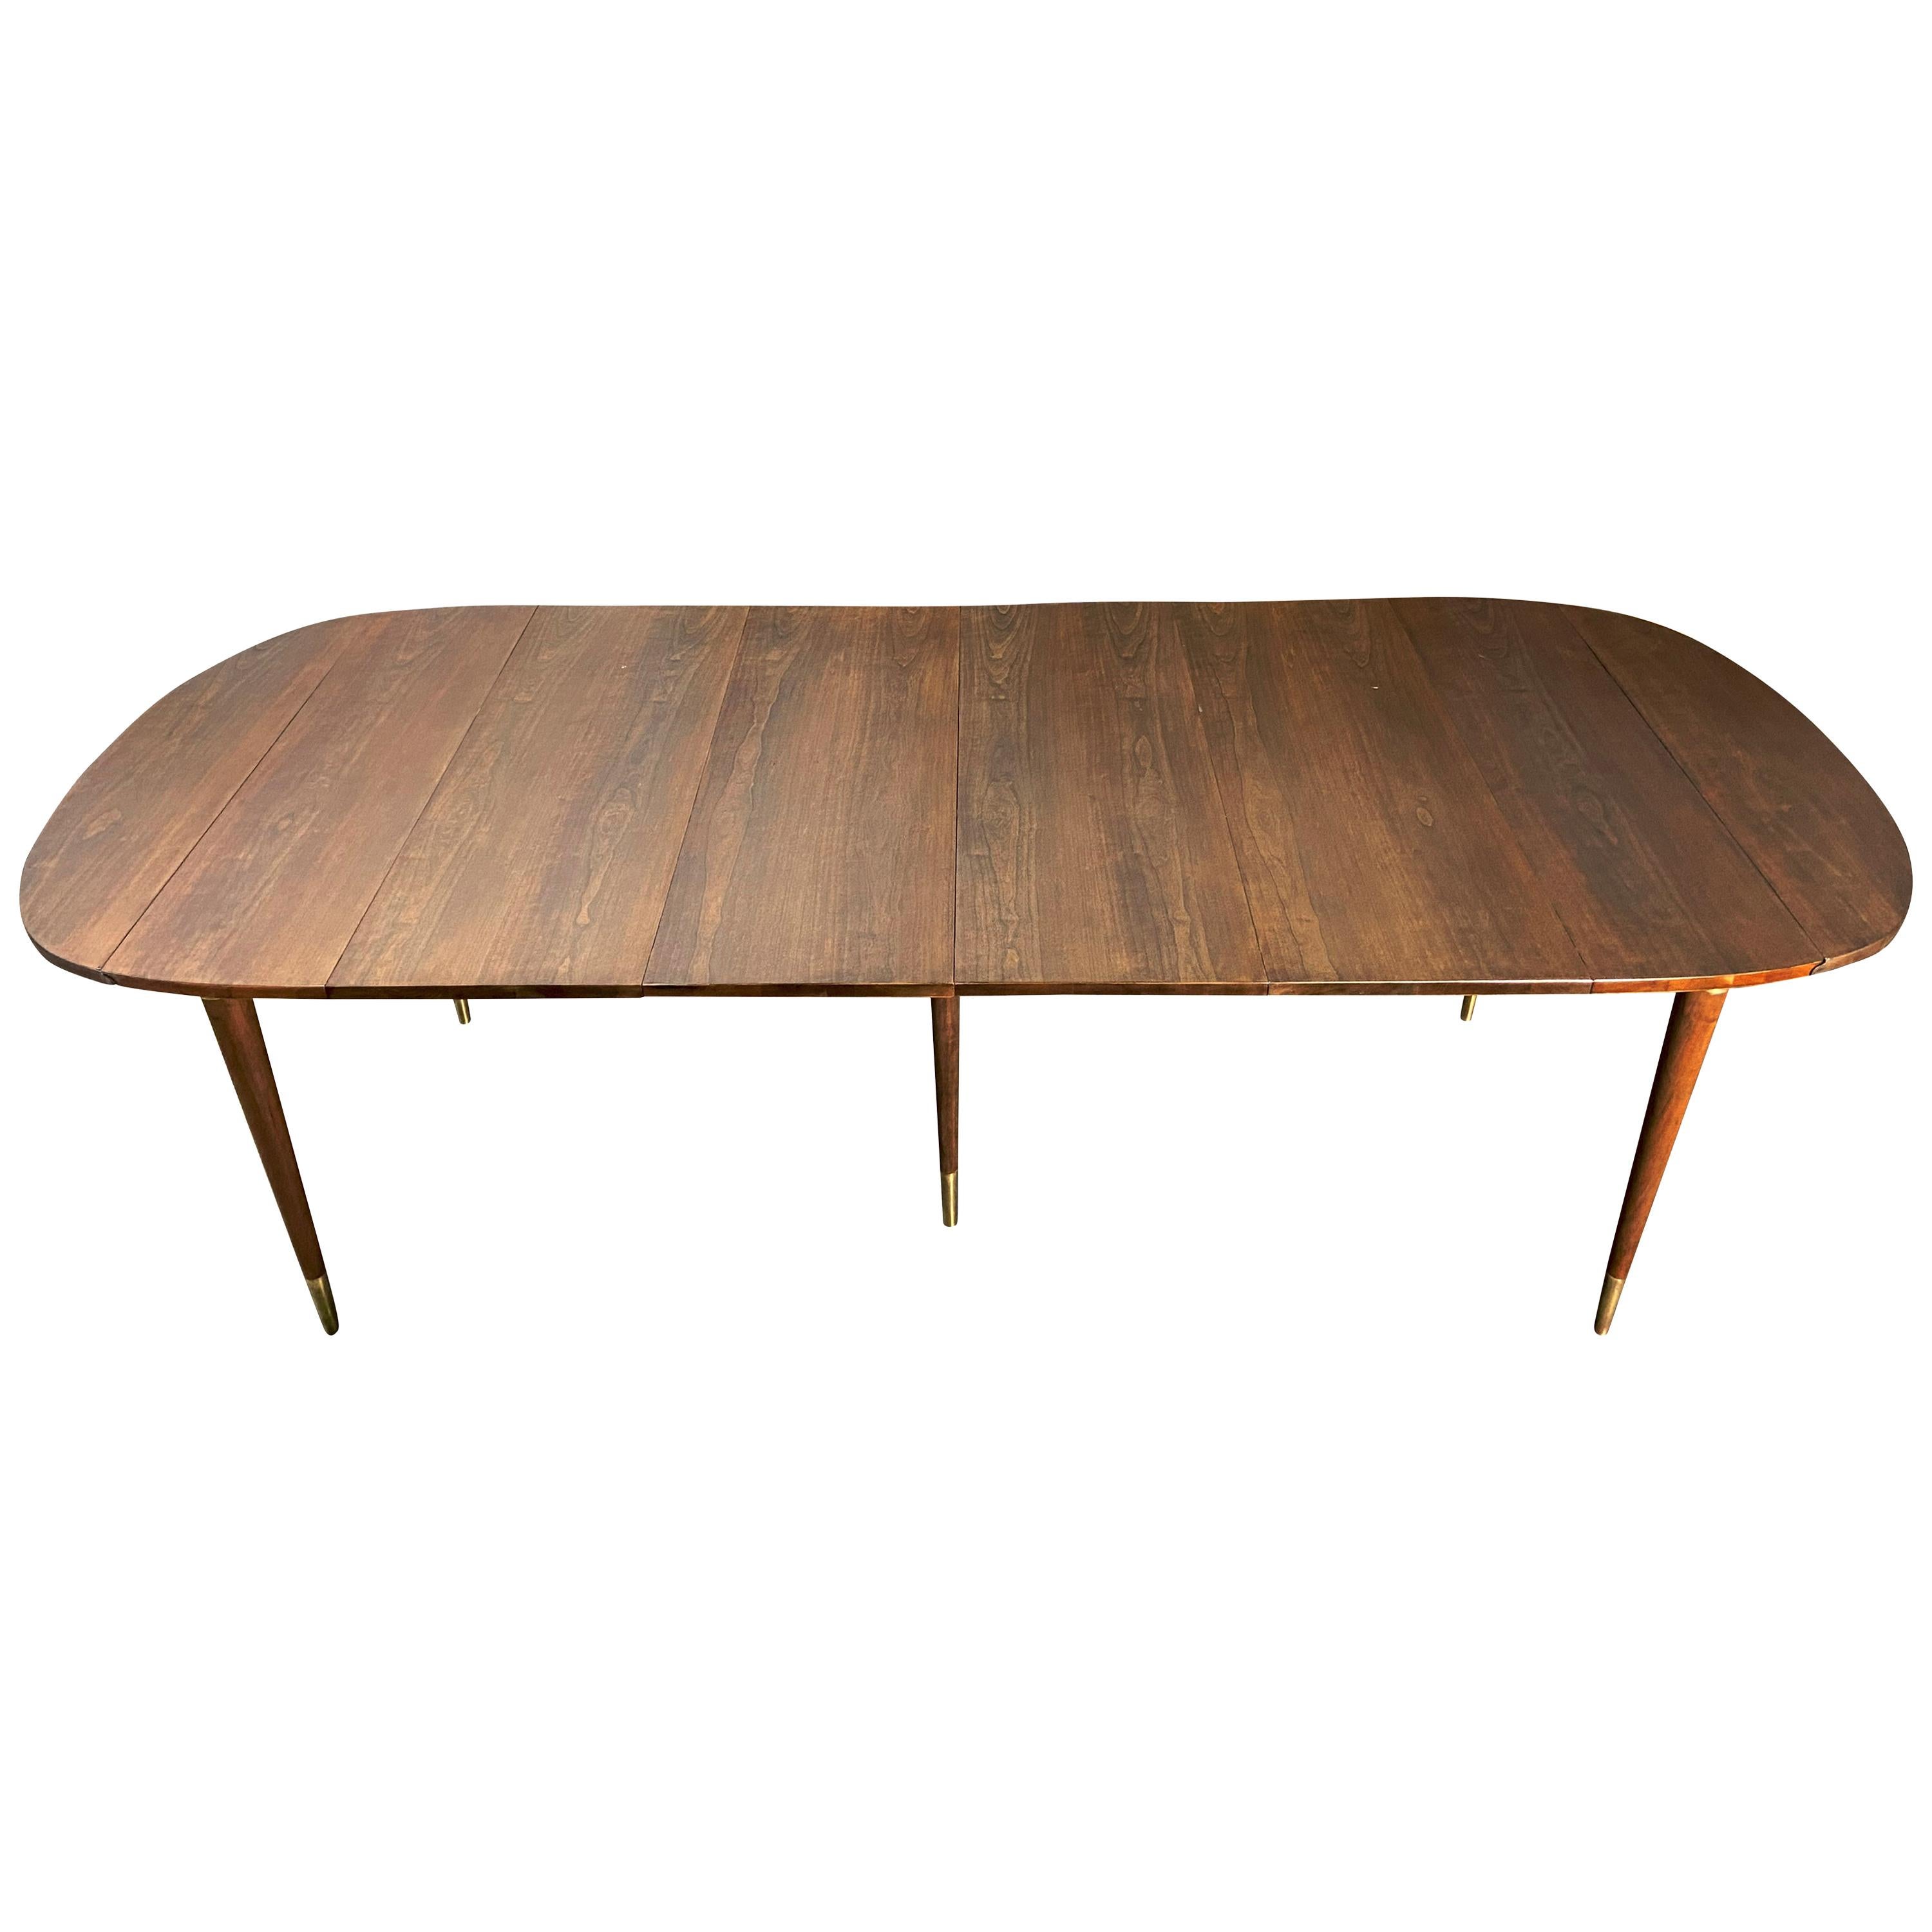 Midcentury Extension Drop-Leaf Dining Table by John Widdicomb